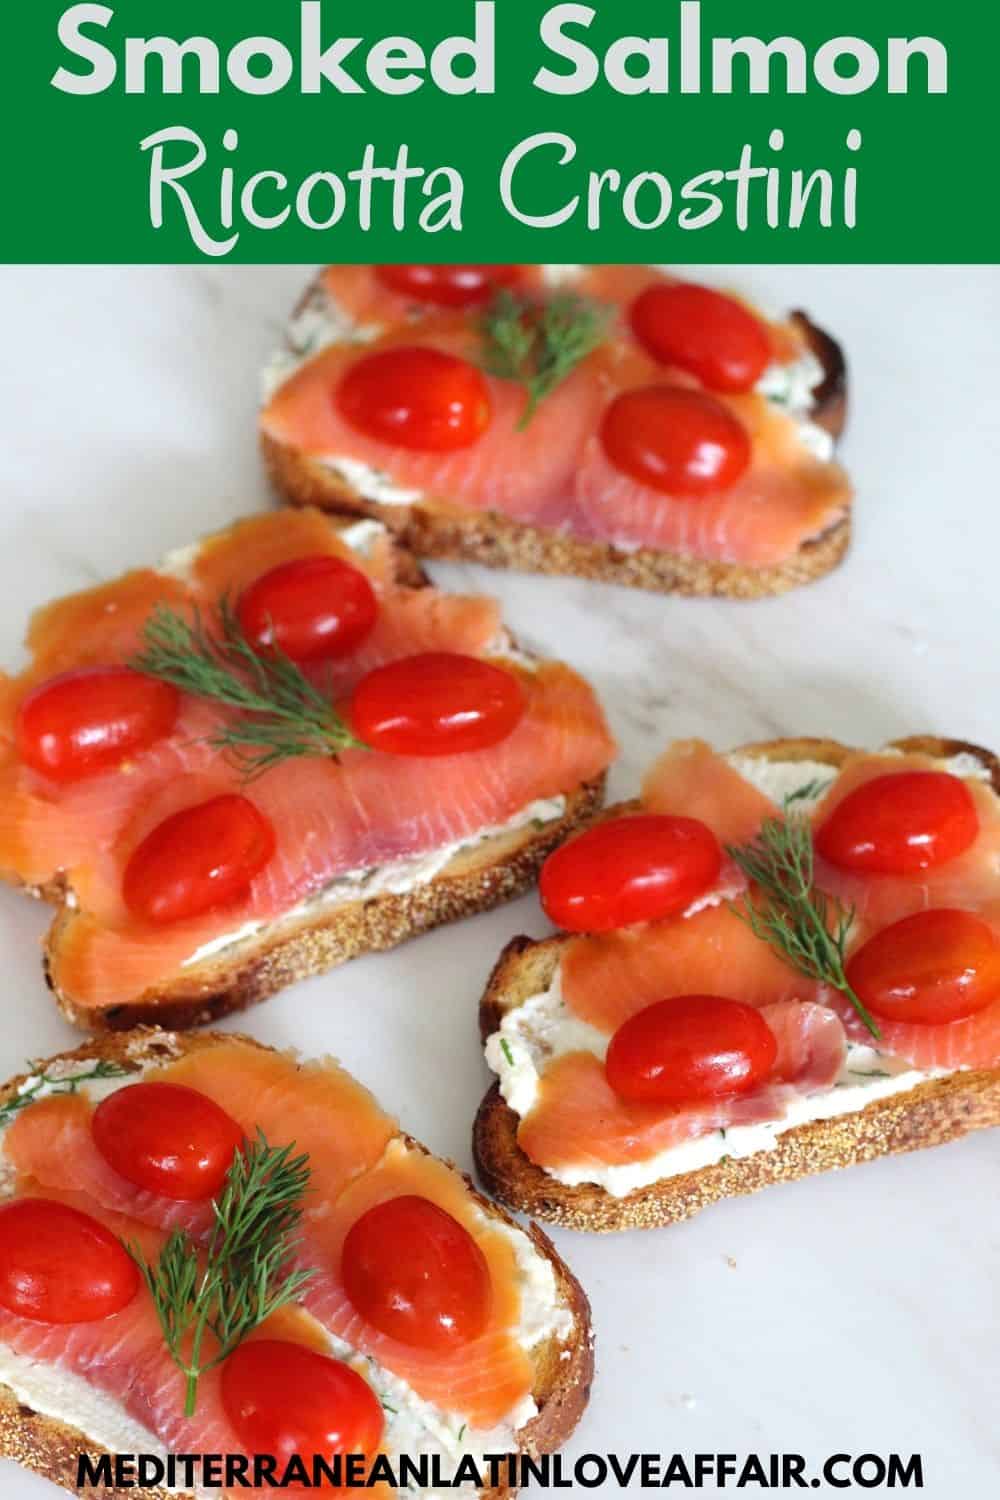 An image prepared for Pinterest. It shows the smoked salmon crostini in the center, a title bar on top of the picture and a website link at the bottom.